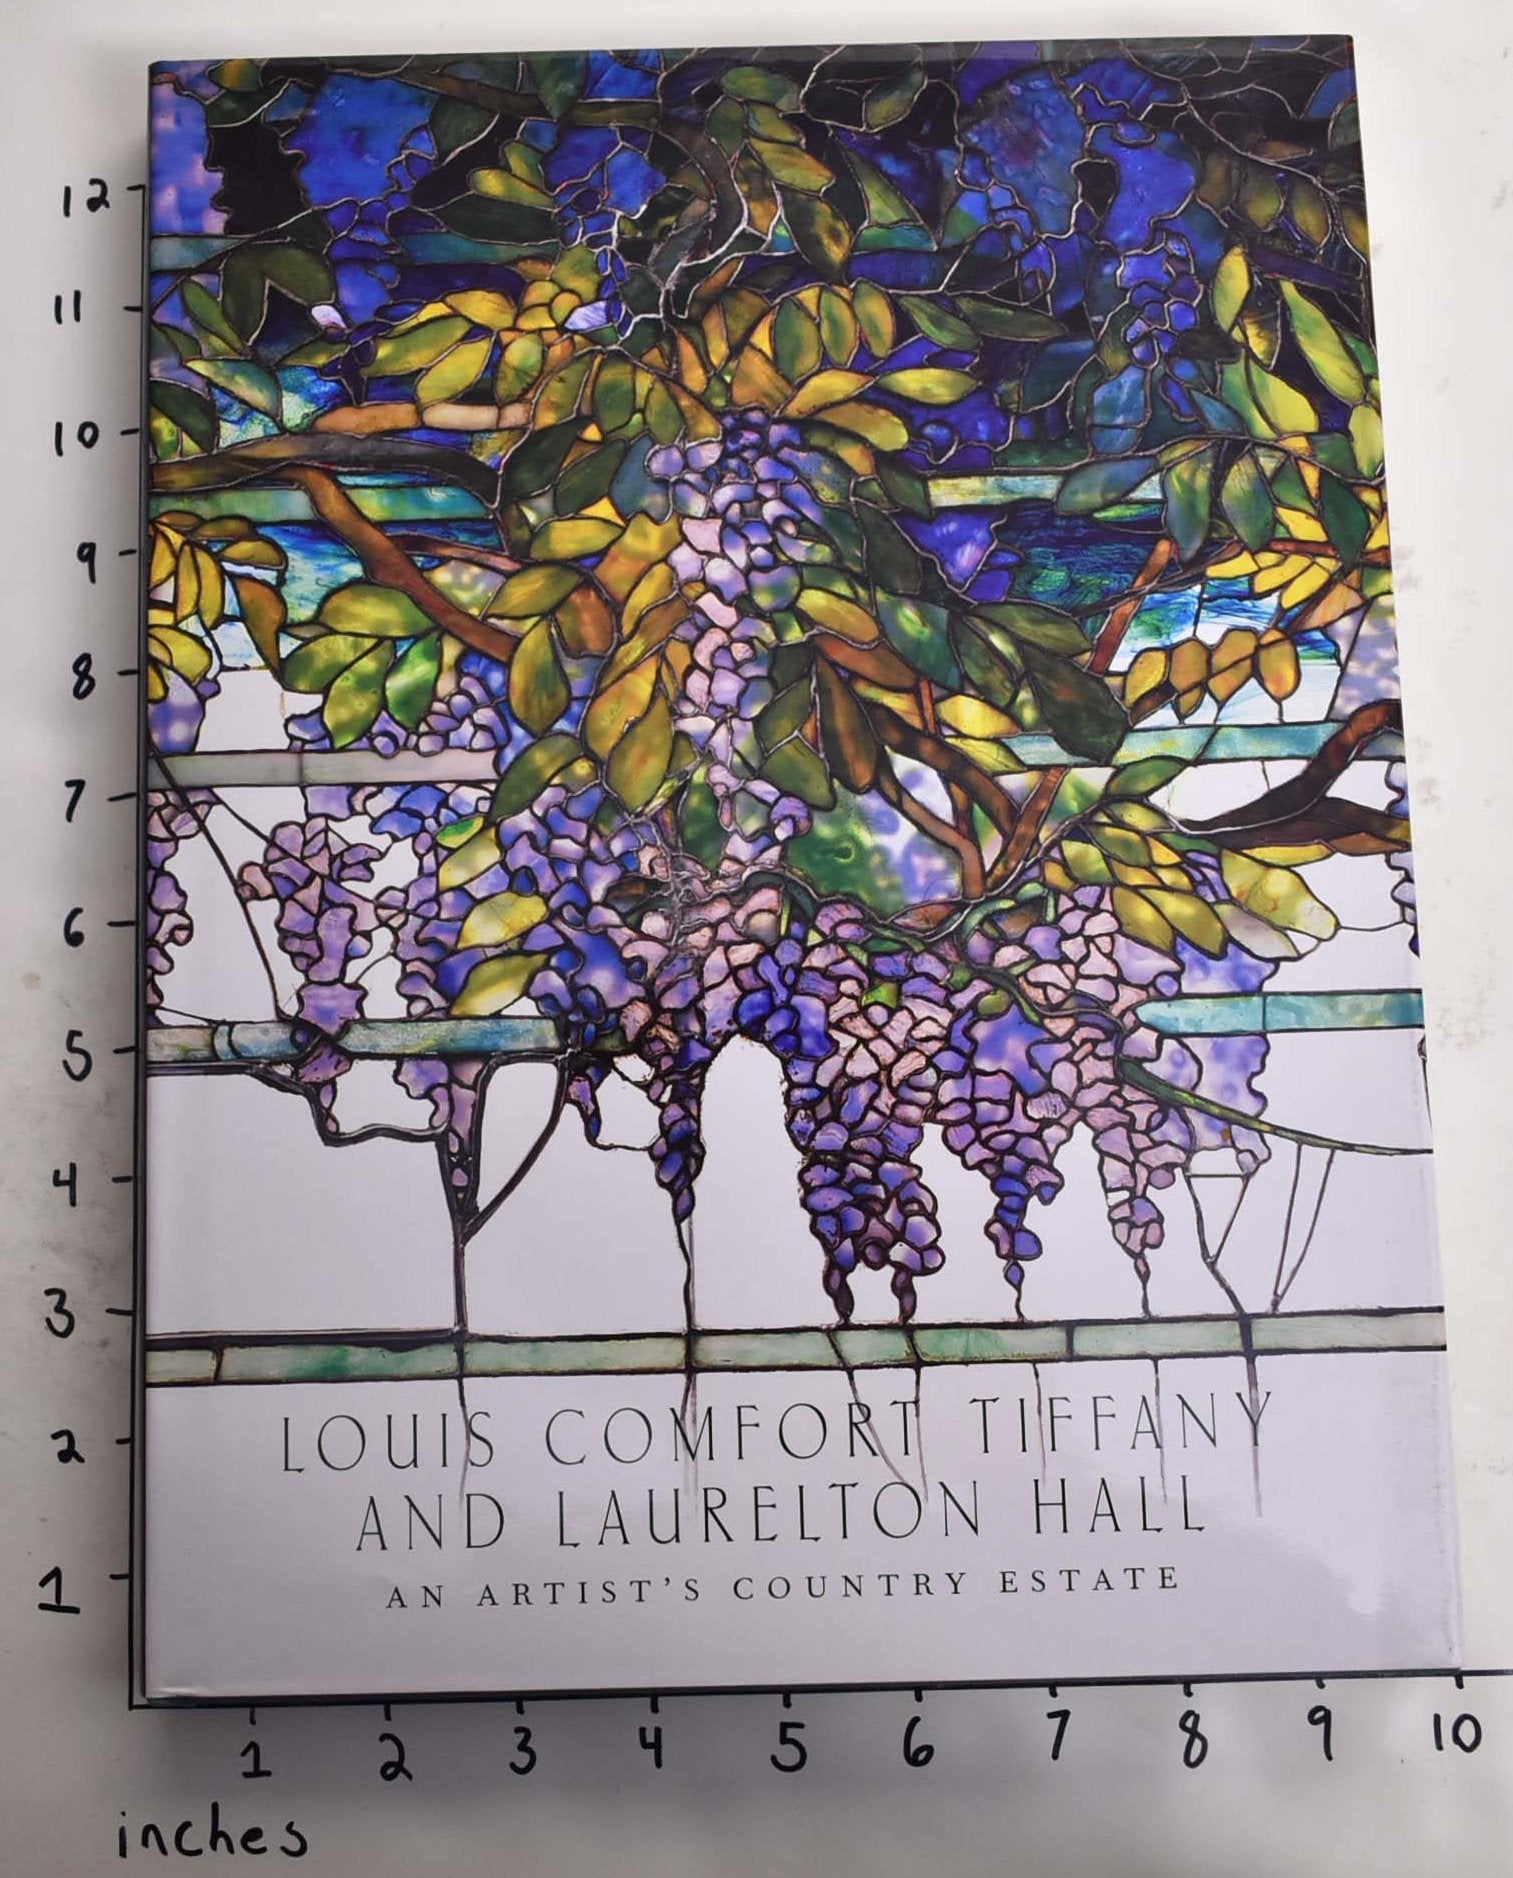 Louis Comfort Tiffany and Laurelton Hall: An Artist's Country Estate, 2006